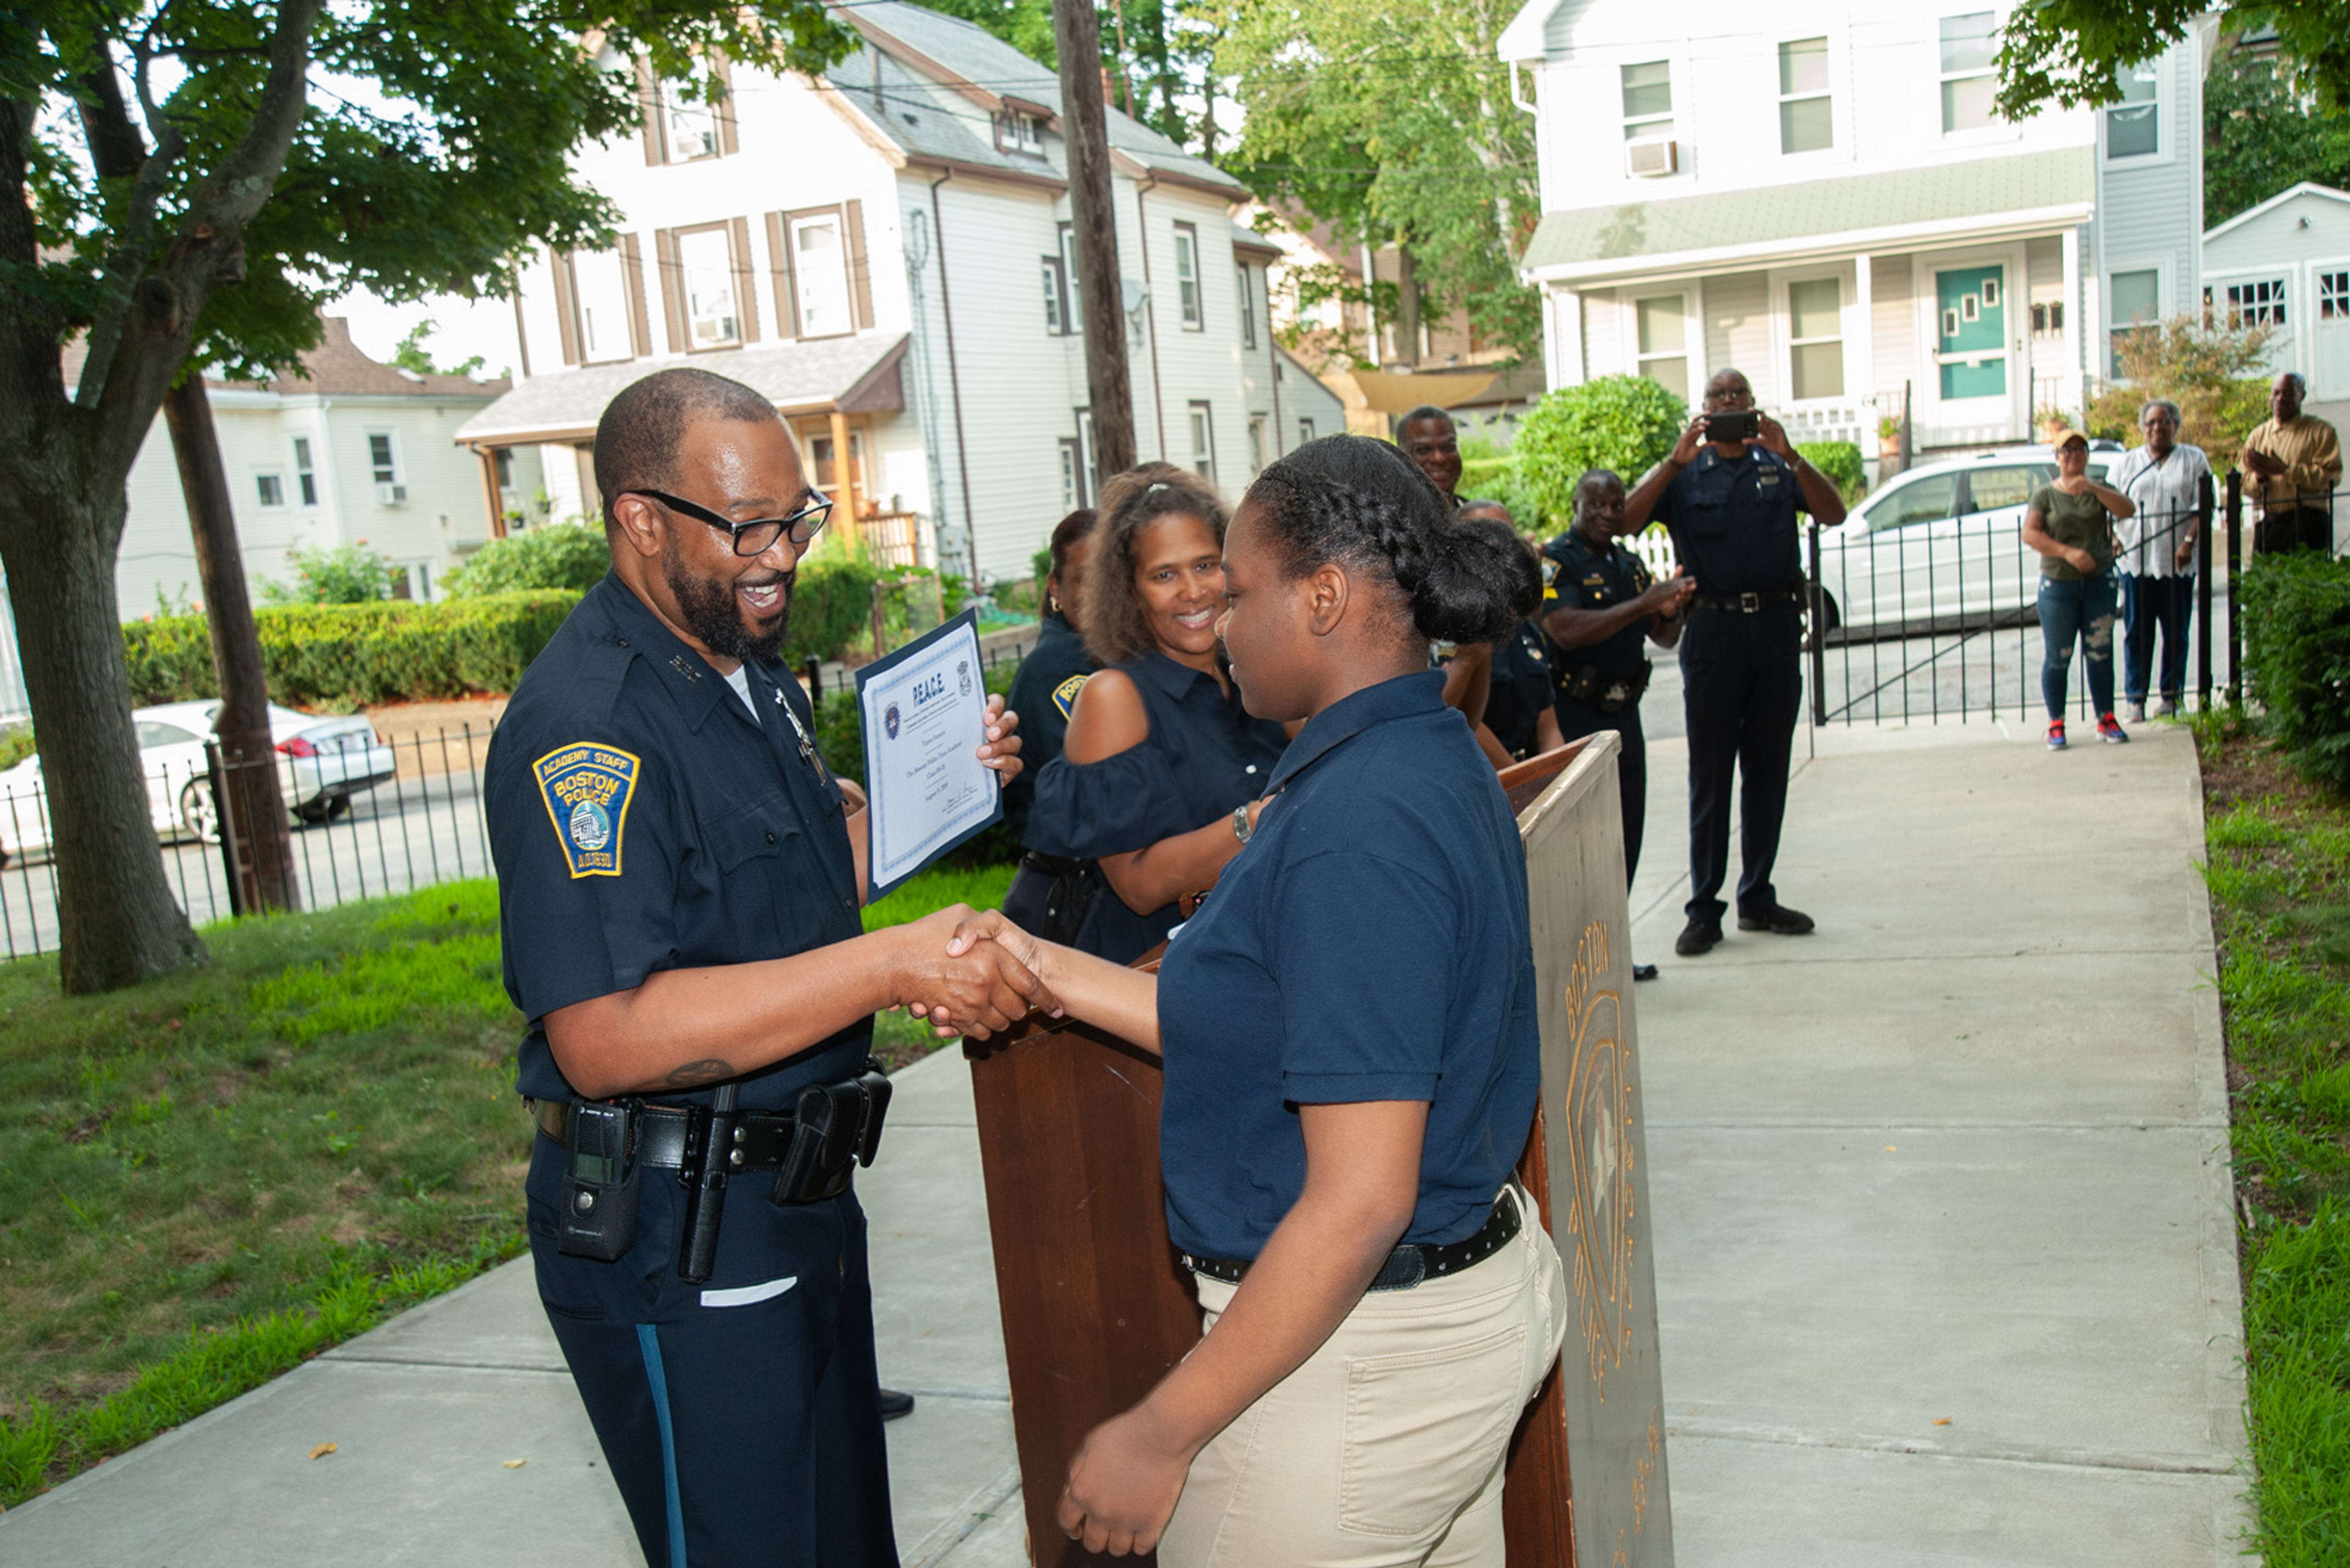 In 2017, ABCD launched a two-year Department of Labor-funded project to guide court-involved or at-risk youth into justice/service career paths. Participants are drawn from high-crime, high-poverty areas and earn credits via dual high school-college enrollment, taking a Criminal Justice or Introduction to Fire Safety course at Urban College of Boston. They take courses leading to First Aid, CPR and OSHA certification, access internship opportunities, hold SummerWorks jobs with the Police Academy or Fire Youth Cadet, partner with mentors in chosen fields and have access to other ABCD programs and services.